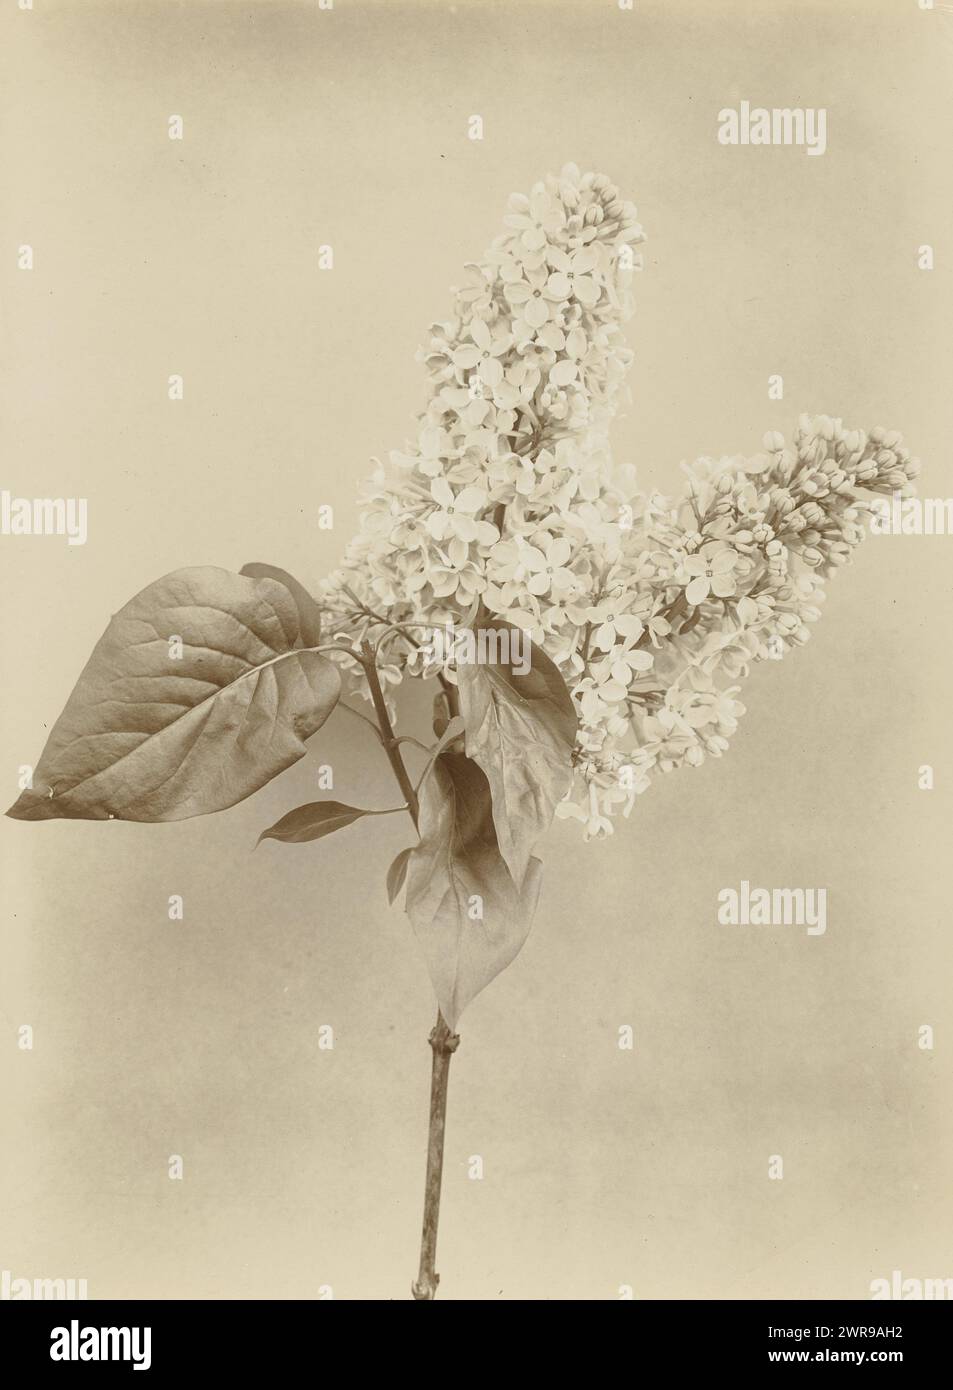 Branch of a lilac, Flowering Lilac Branch Charles, Richard Tepe, Netherlands, c. 1900 - c. 1930, photographic support, height 223 mm × width 164 mm, photograph Stock Photo